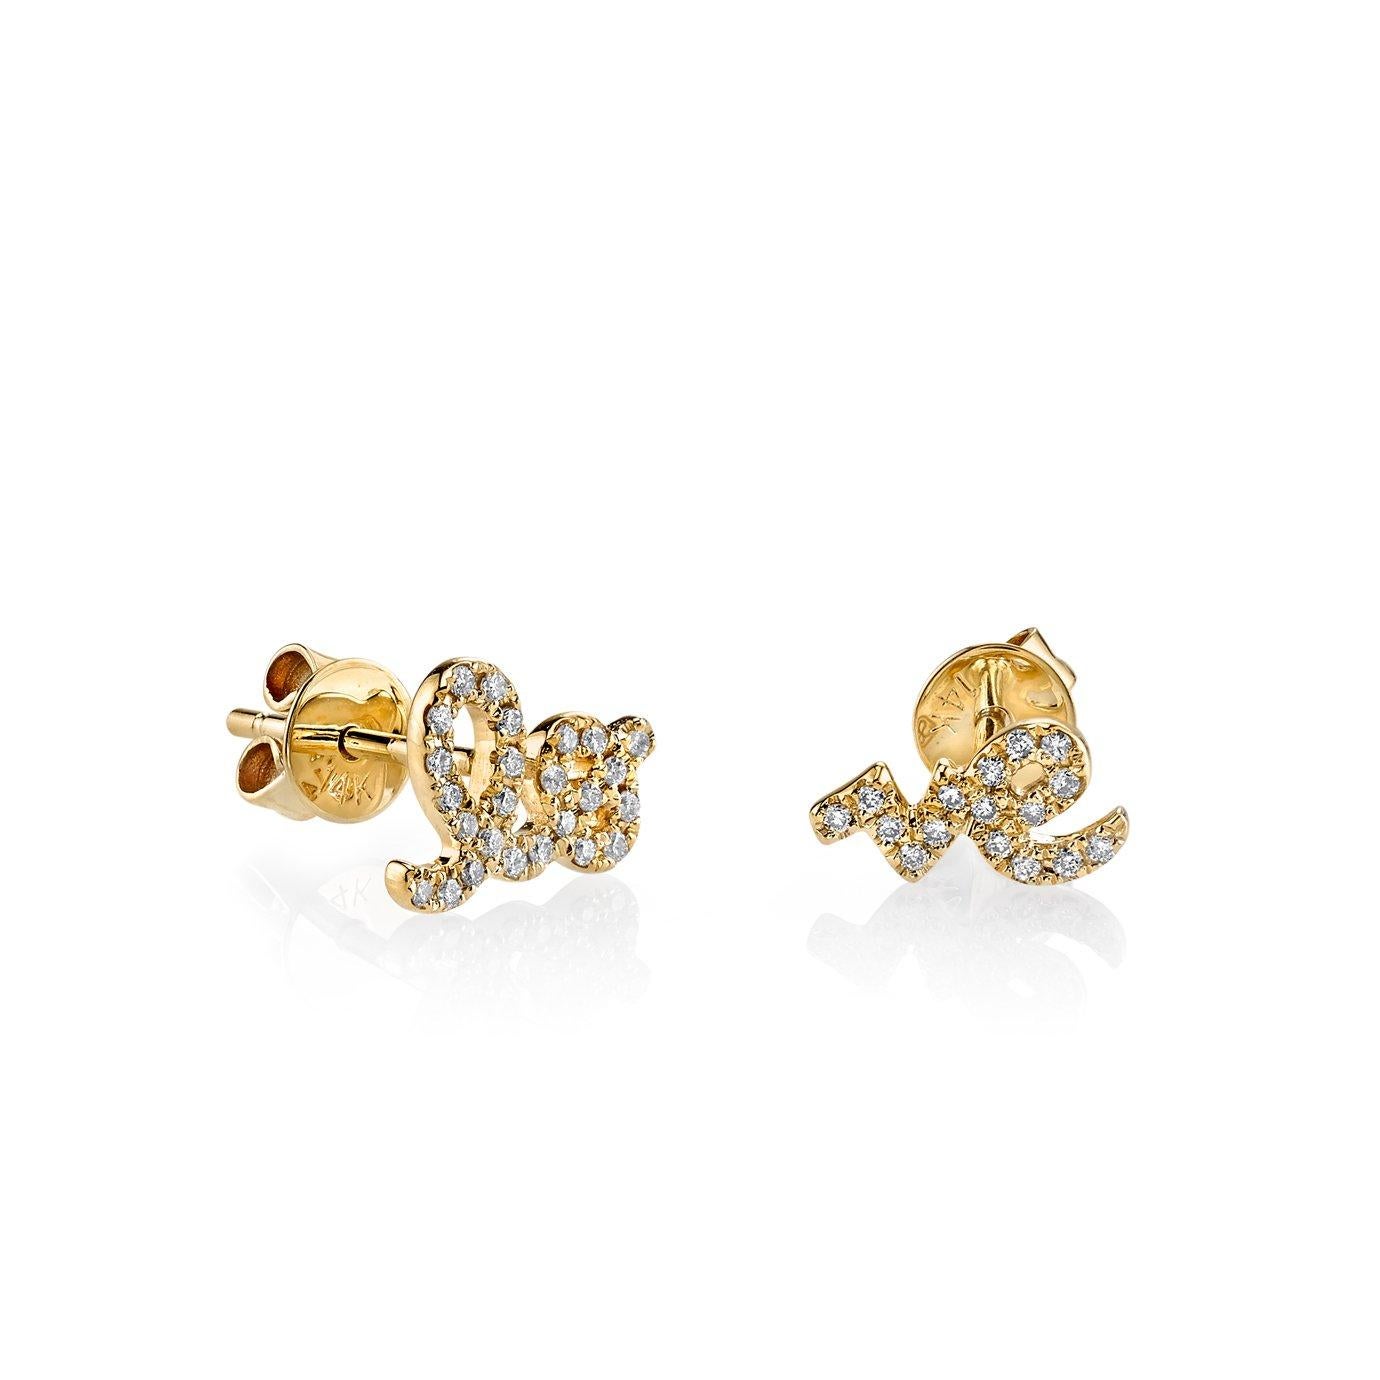 These earrings are a true craft of passion, shaped from 14-karat gold. They artfully depict the word 'Love' in Rosanne Karmes' signature cursive, each letter glistening with 0.11-carats of sparkling diamonds.

14K Yellow Gold
39 Diamonds
Diamonds